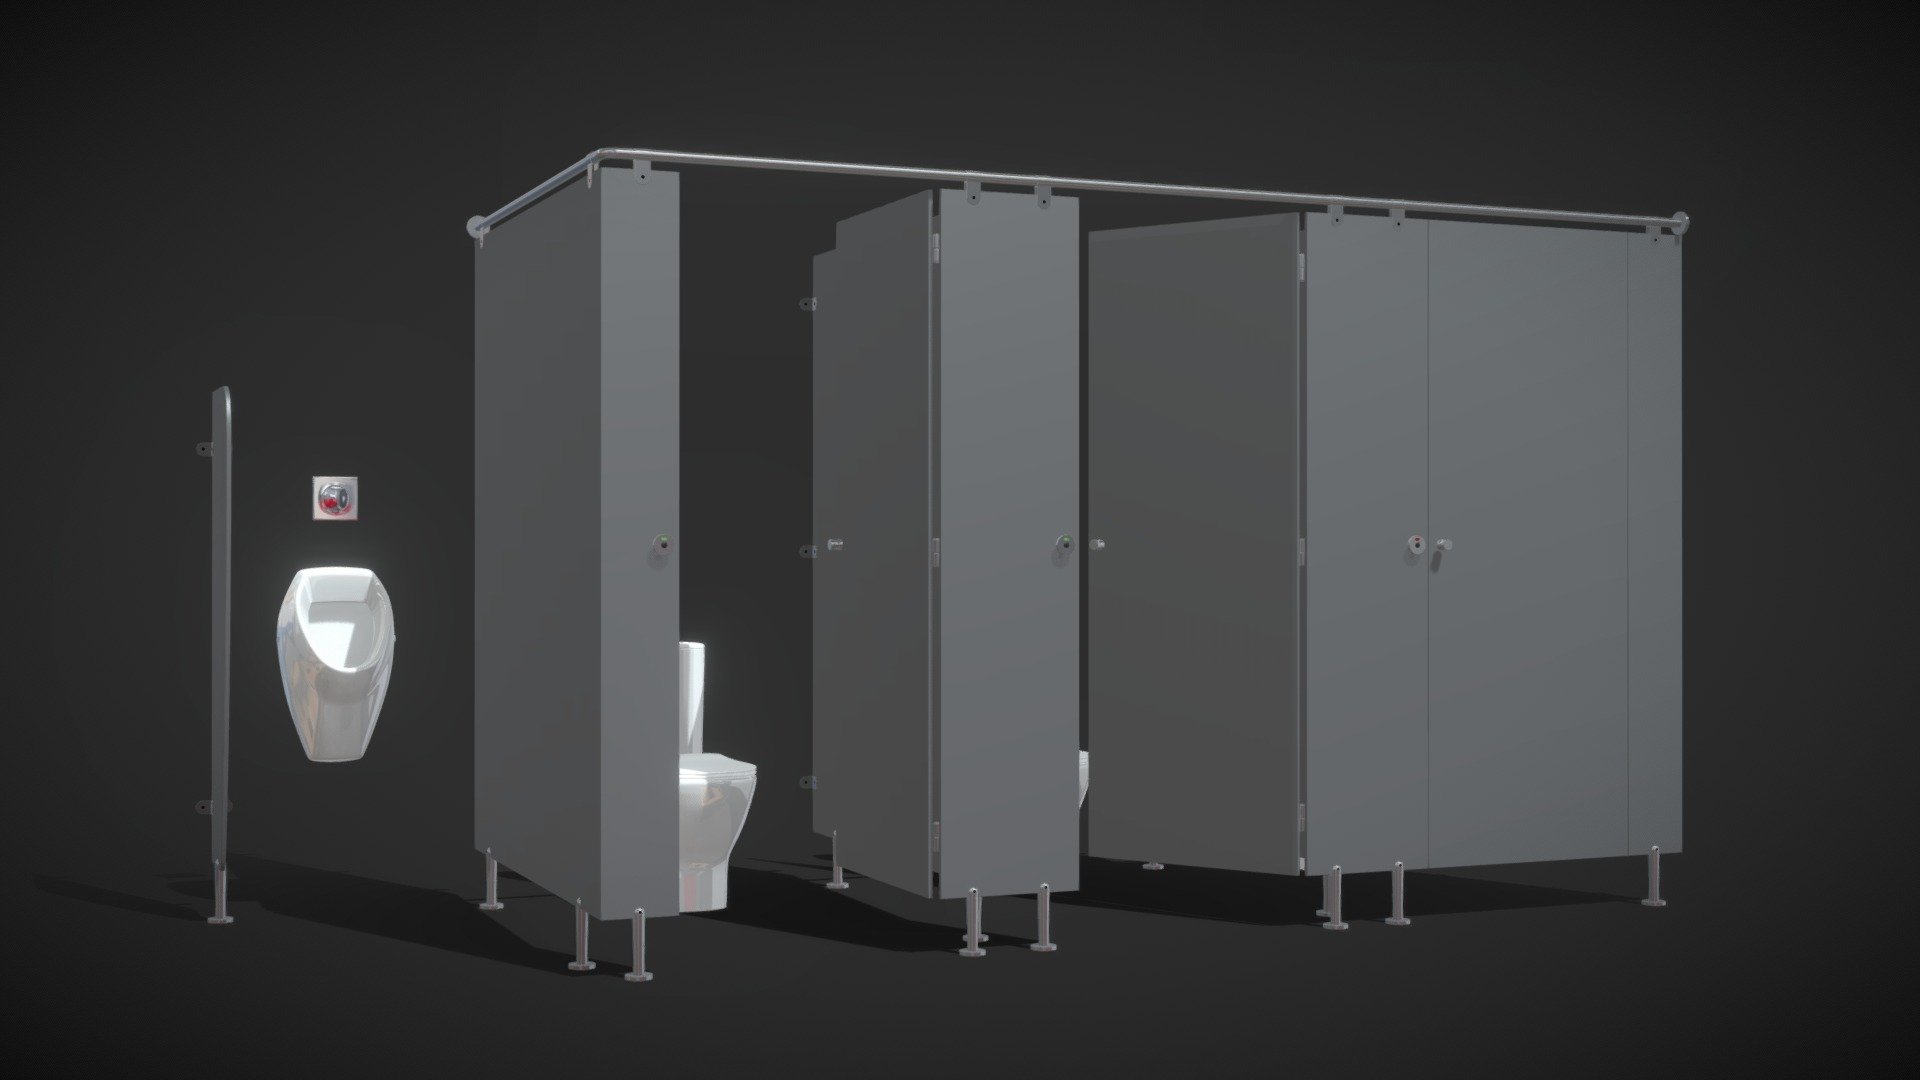 Realistic (copy) 3d model of Sanitary partitions for public toilets Funder Max 1.

Topology of geometry:
- forms and proportions of The 3D model most similar to the real object
- the geometry of the model was created very neatly
- there are no many-sided polygons
- detailed enough for close-up renders

Materials and Textures:
- 3ds max files included Vray-Shaders
- 3ds max files included Corona-Shaders
- all texture paths are cleared

Organization of scene:
- to all objects and materials names in scene are appropriated
- real world size (system units - mm)
- coordinates of location of the model in space (x0, y0, z0)
- does not contain extraneous or hidden objects (lights, cameras, shapes etc.)

File Formats:
- original file format - 3ds max 2013 + Vray
- 3ds max 2013 Corona
- obj
- 3ds

In the archive:
- Cersanit urinal
- Toilet bowl Ideal | TESI
- Set of sanitary partitions FunderMax
- Fittings Normbau
From the components of the set, you can set any number of toilet cubicles in public toilets 3d model